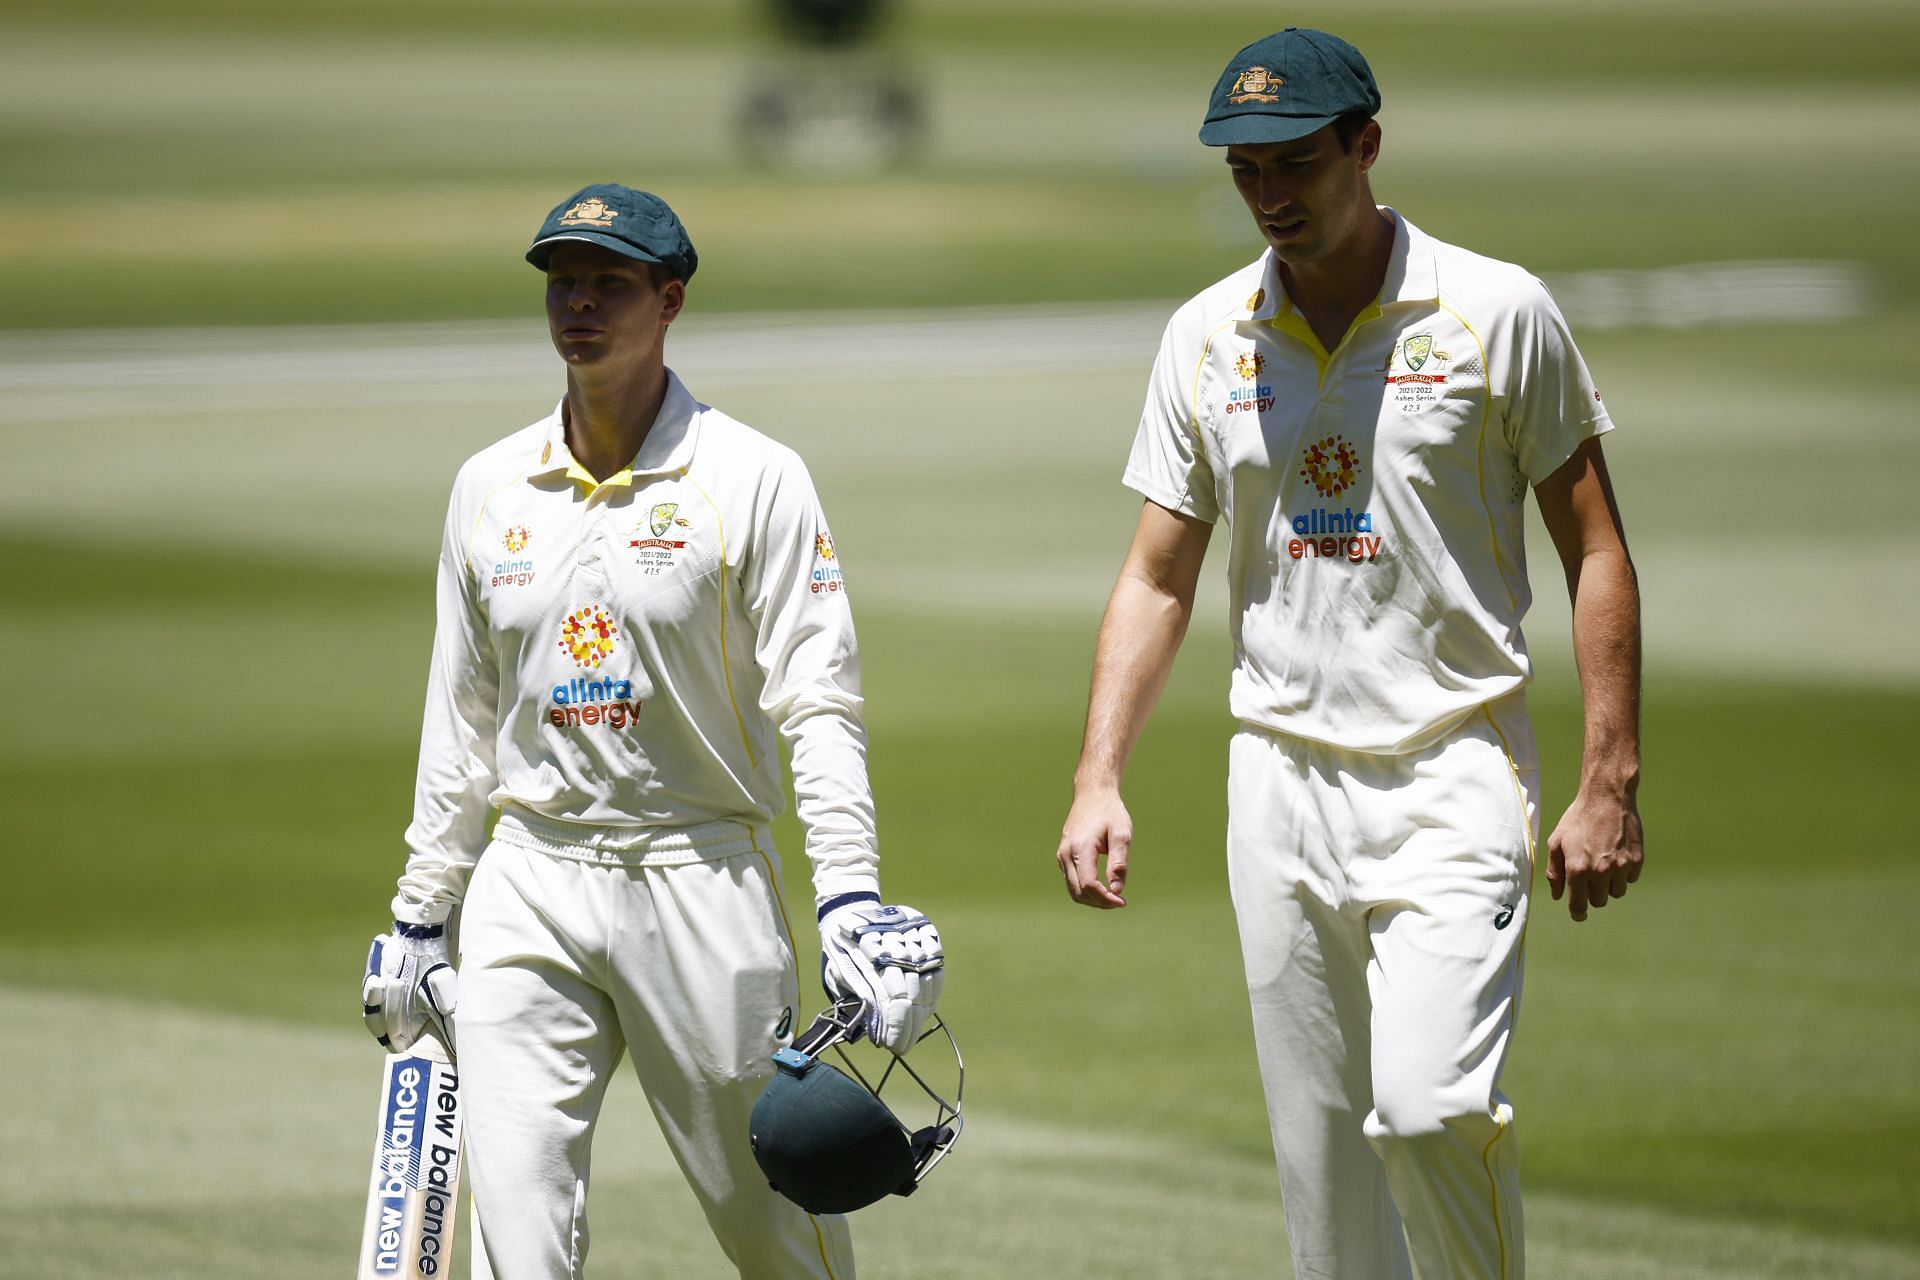 Steve Smith and Pat Cummins. (Image Credits: Getty)